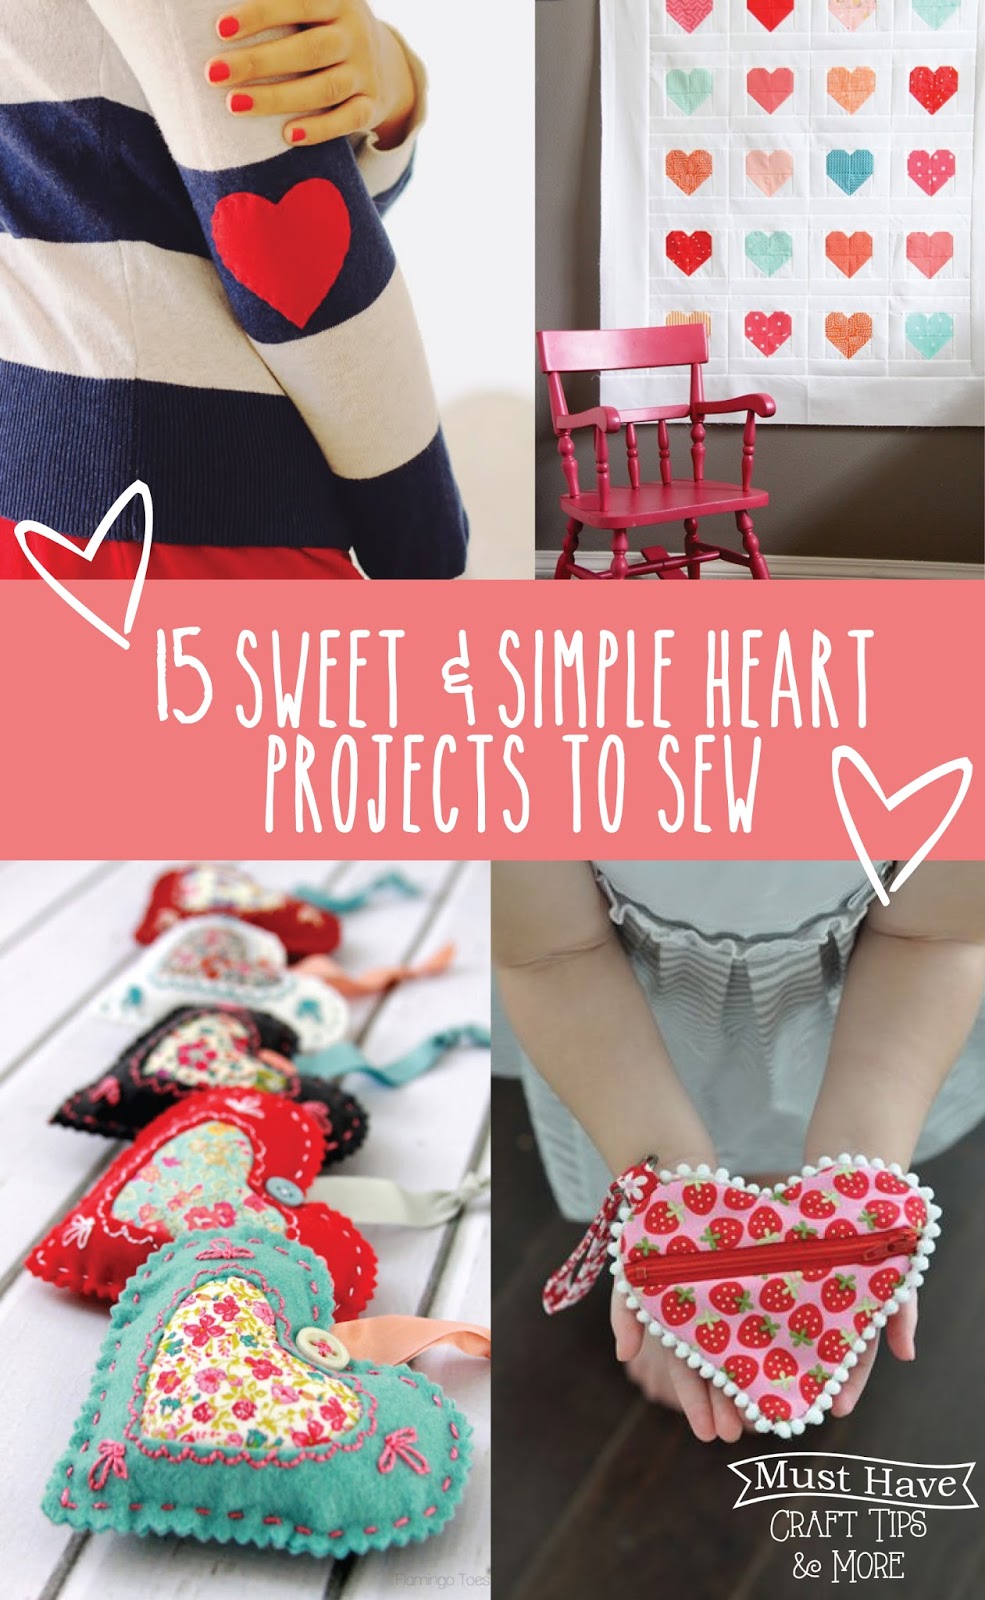 For all you sewers out there here are a selection of projects for you to try from easy clothes patches to a little more plex